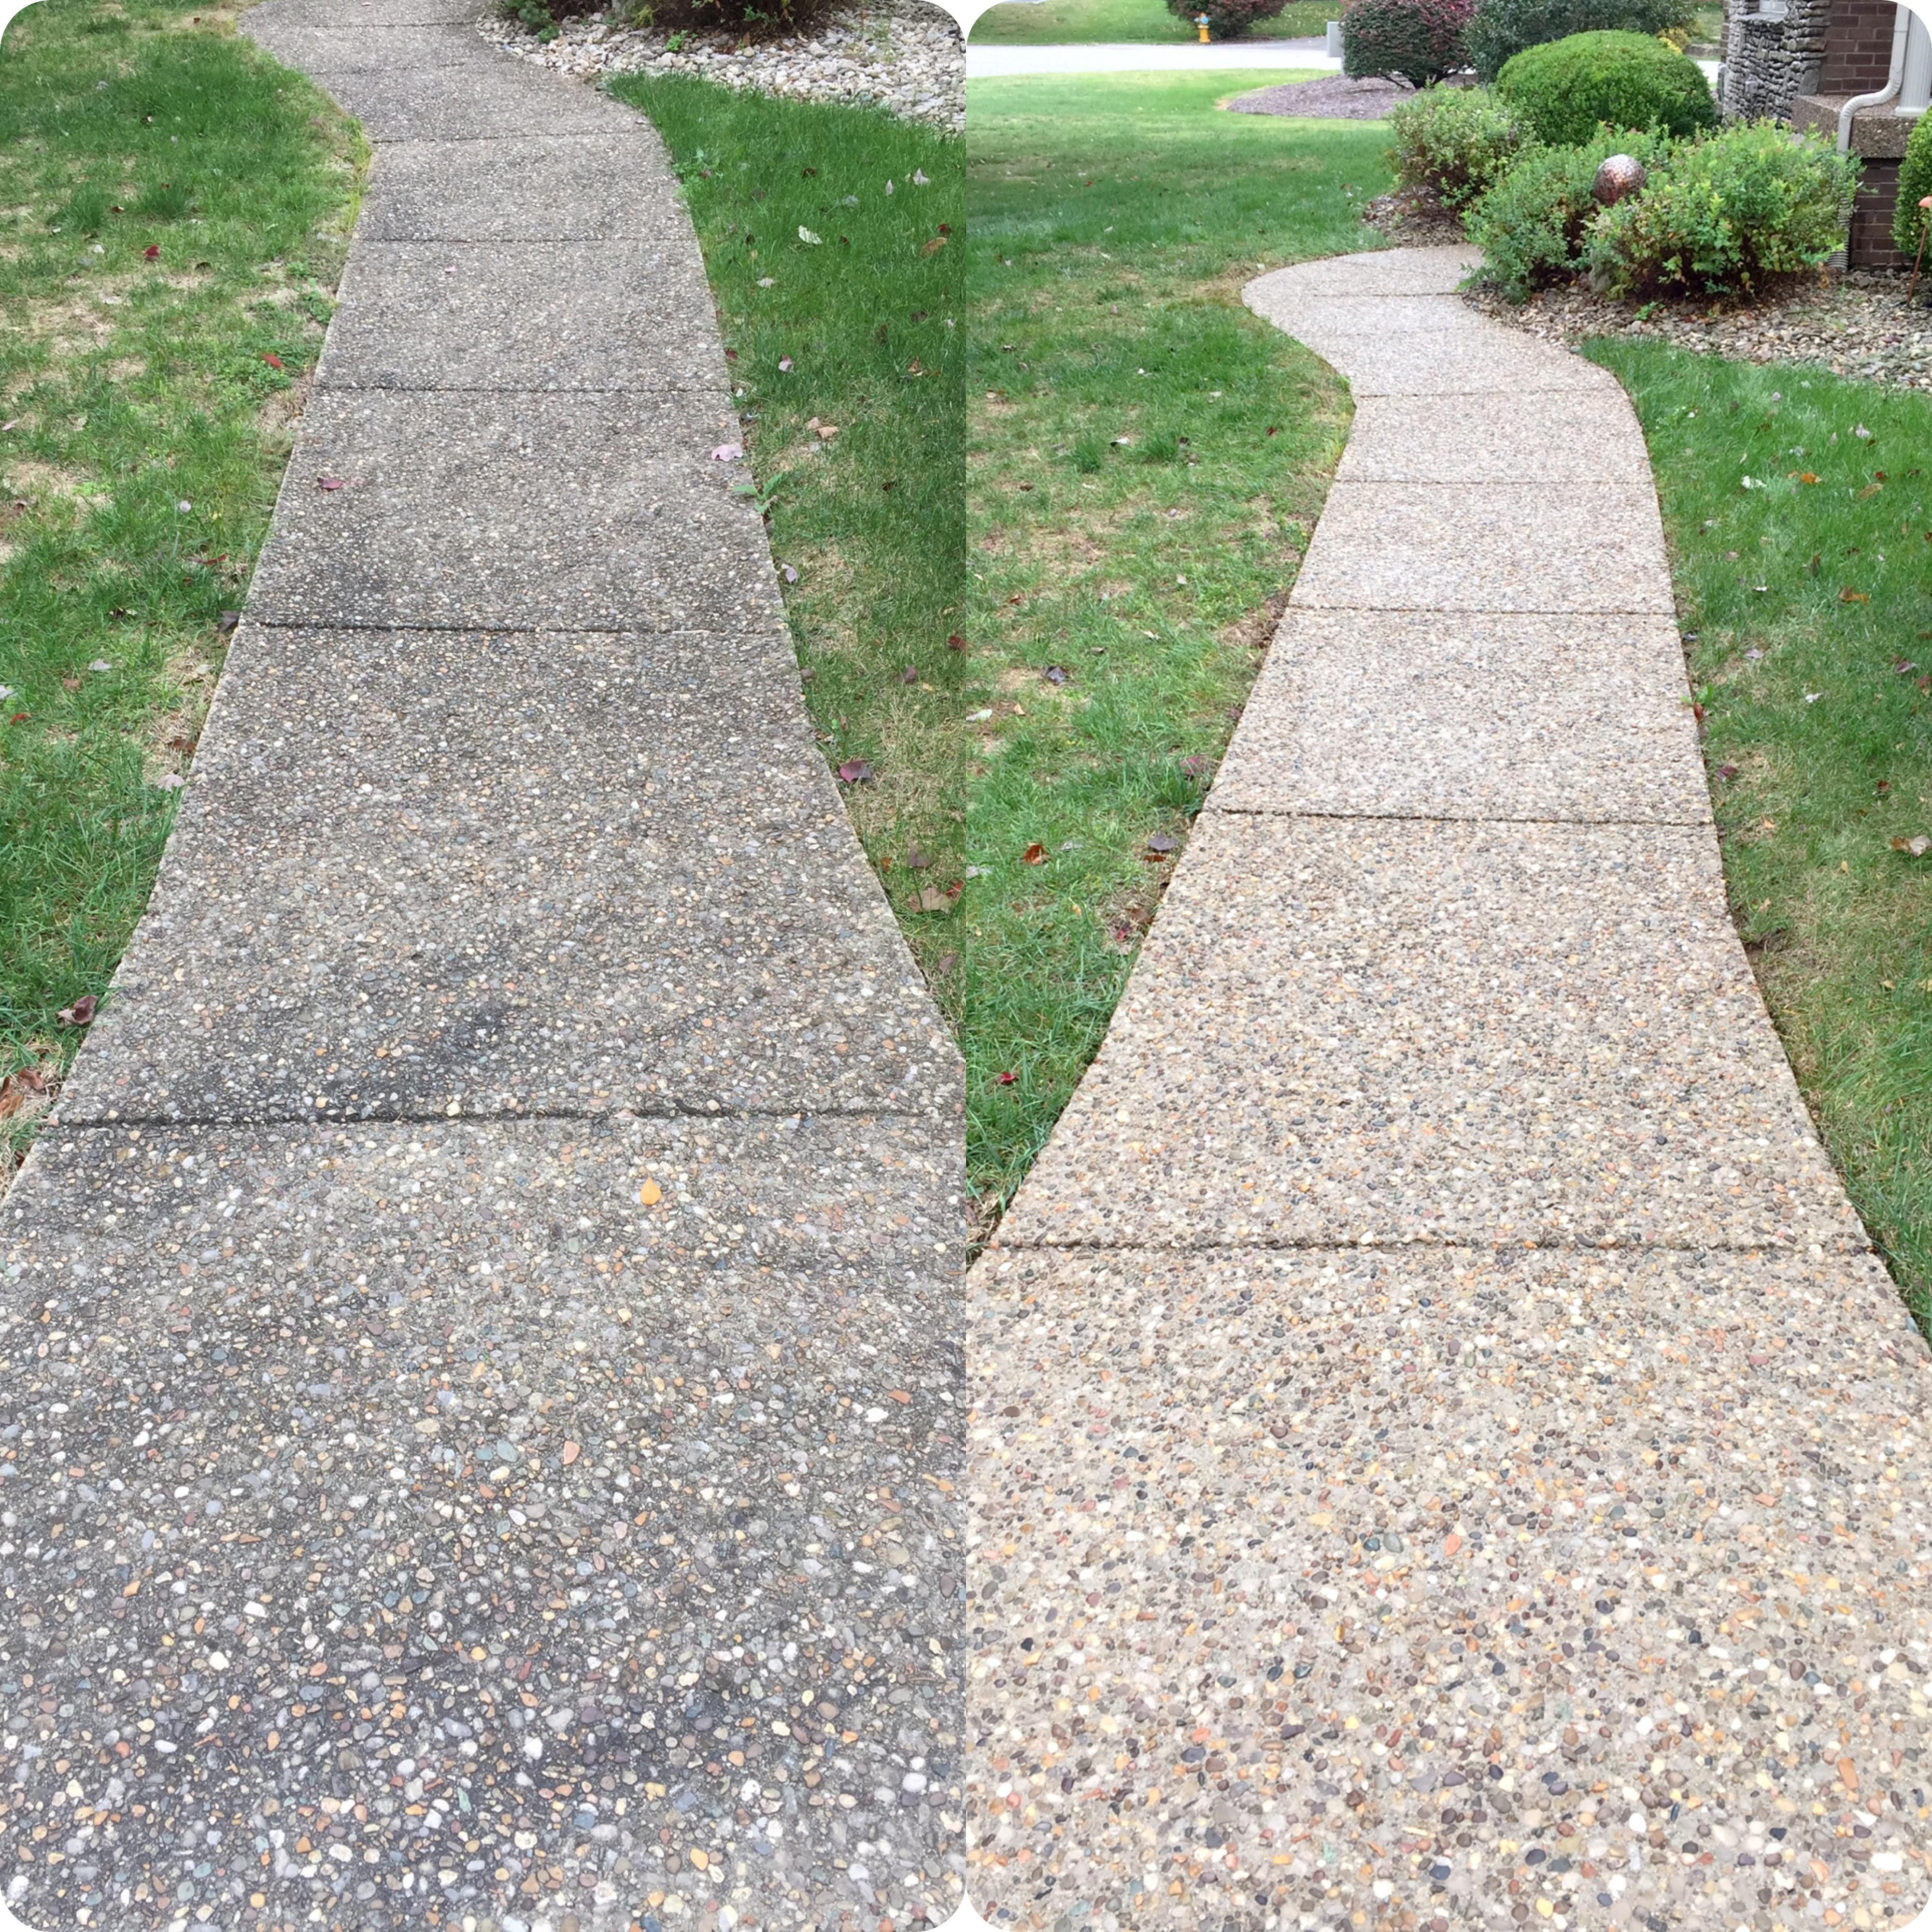 Pressure Washing for Total Property Solutions in Saint Matthews, KY